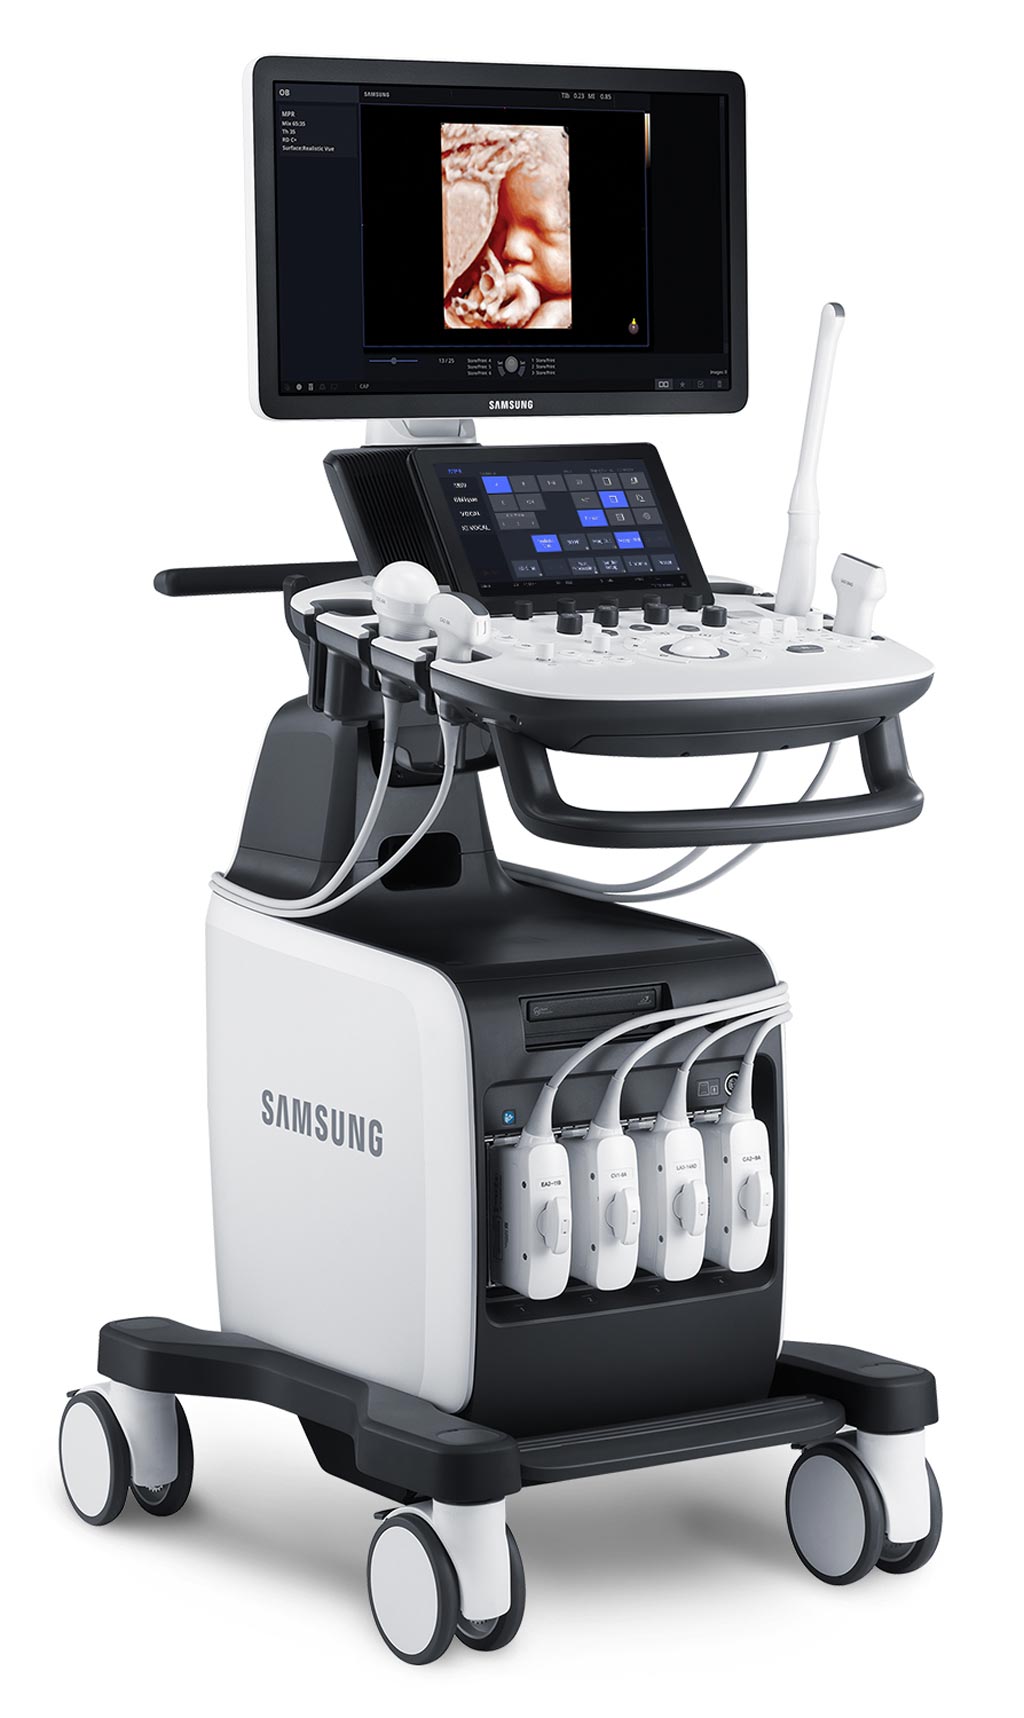 Image: The new mid-range HS60 ultrasound system that includes advanced high-end technologies (Photo courtesy of Samsung).